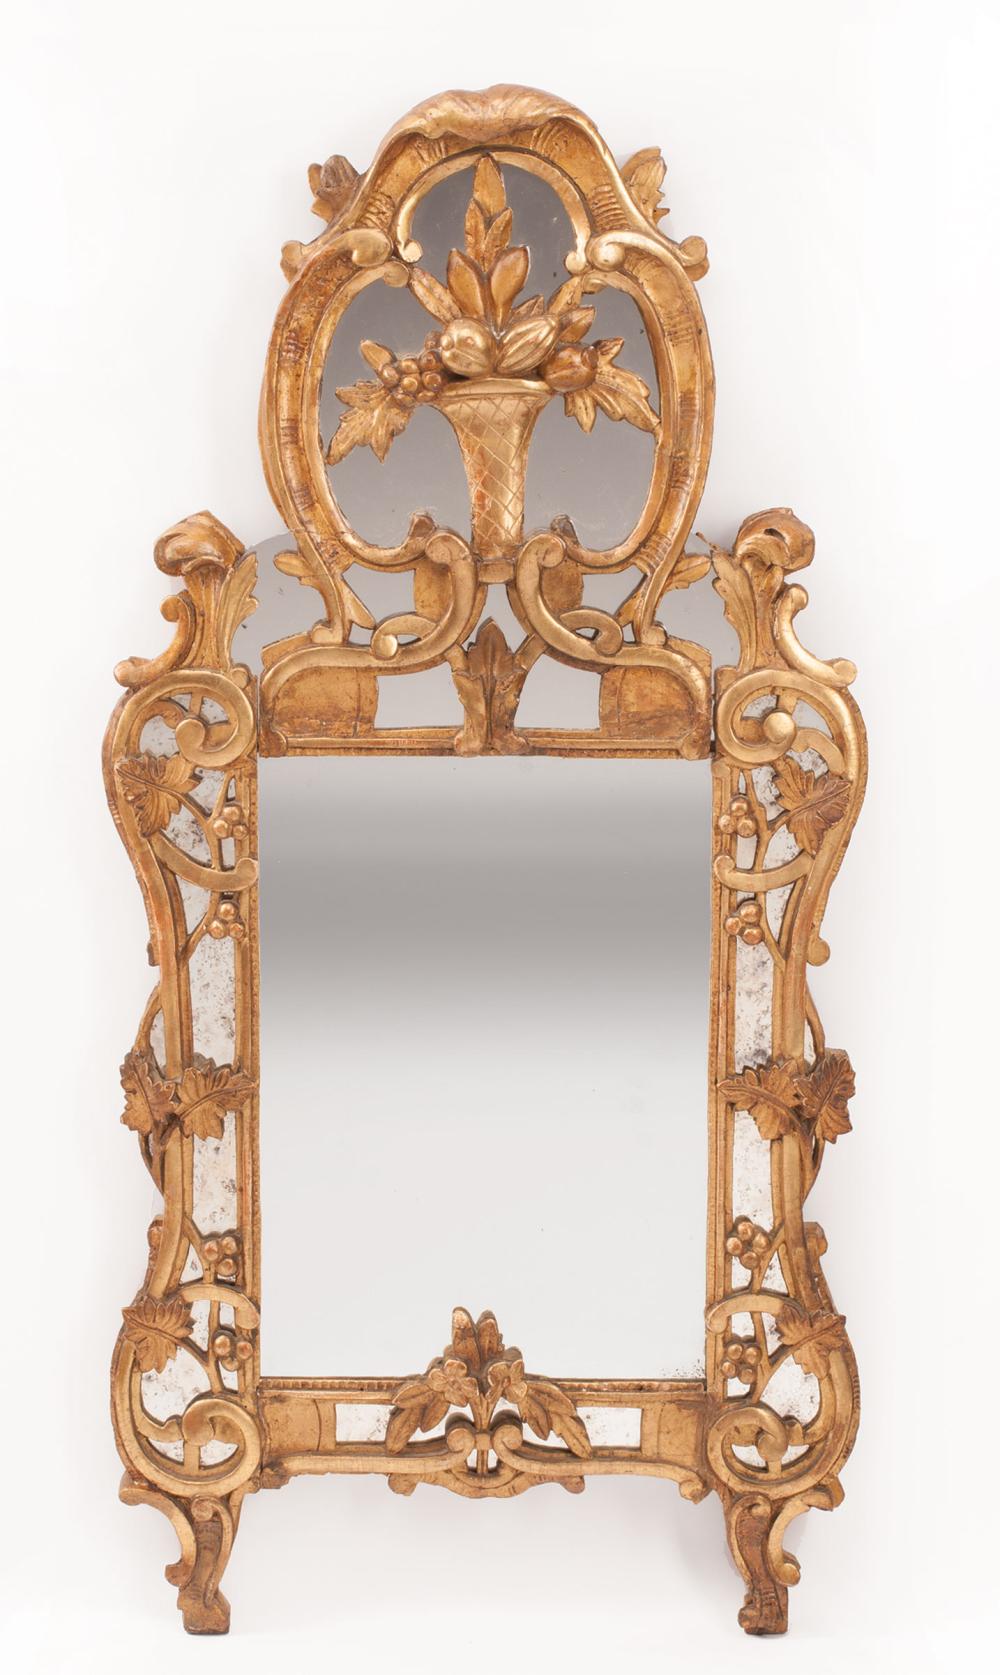 ANTIQUE VENETIAN-STYLE CARVED GILTWOOD